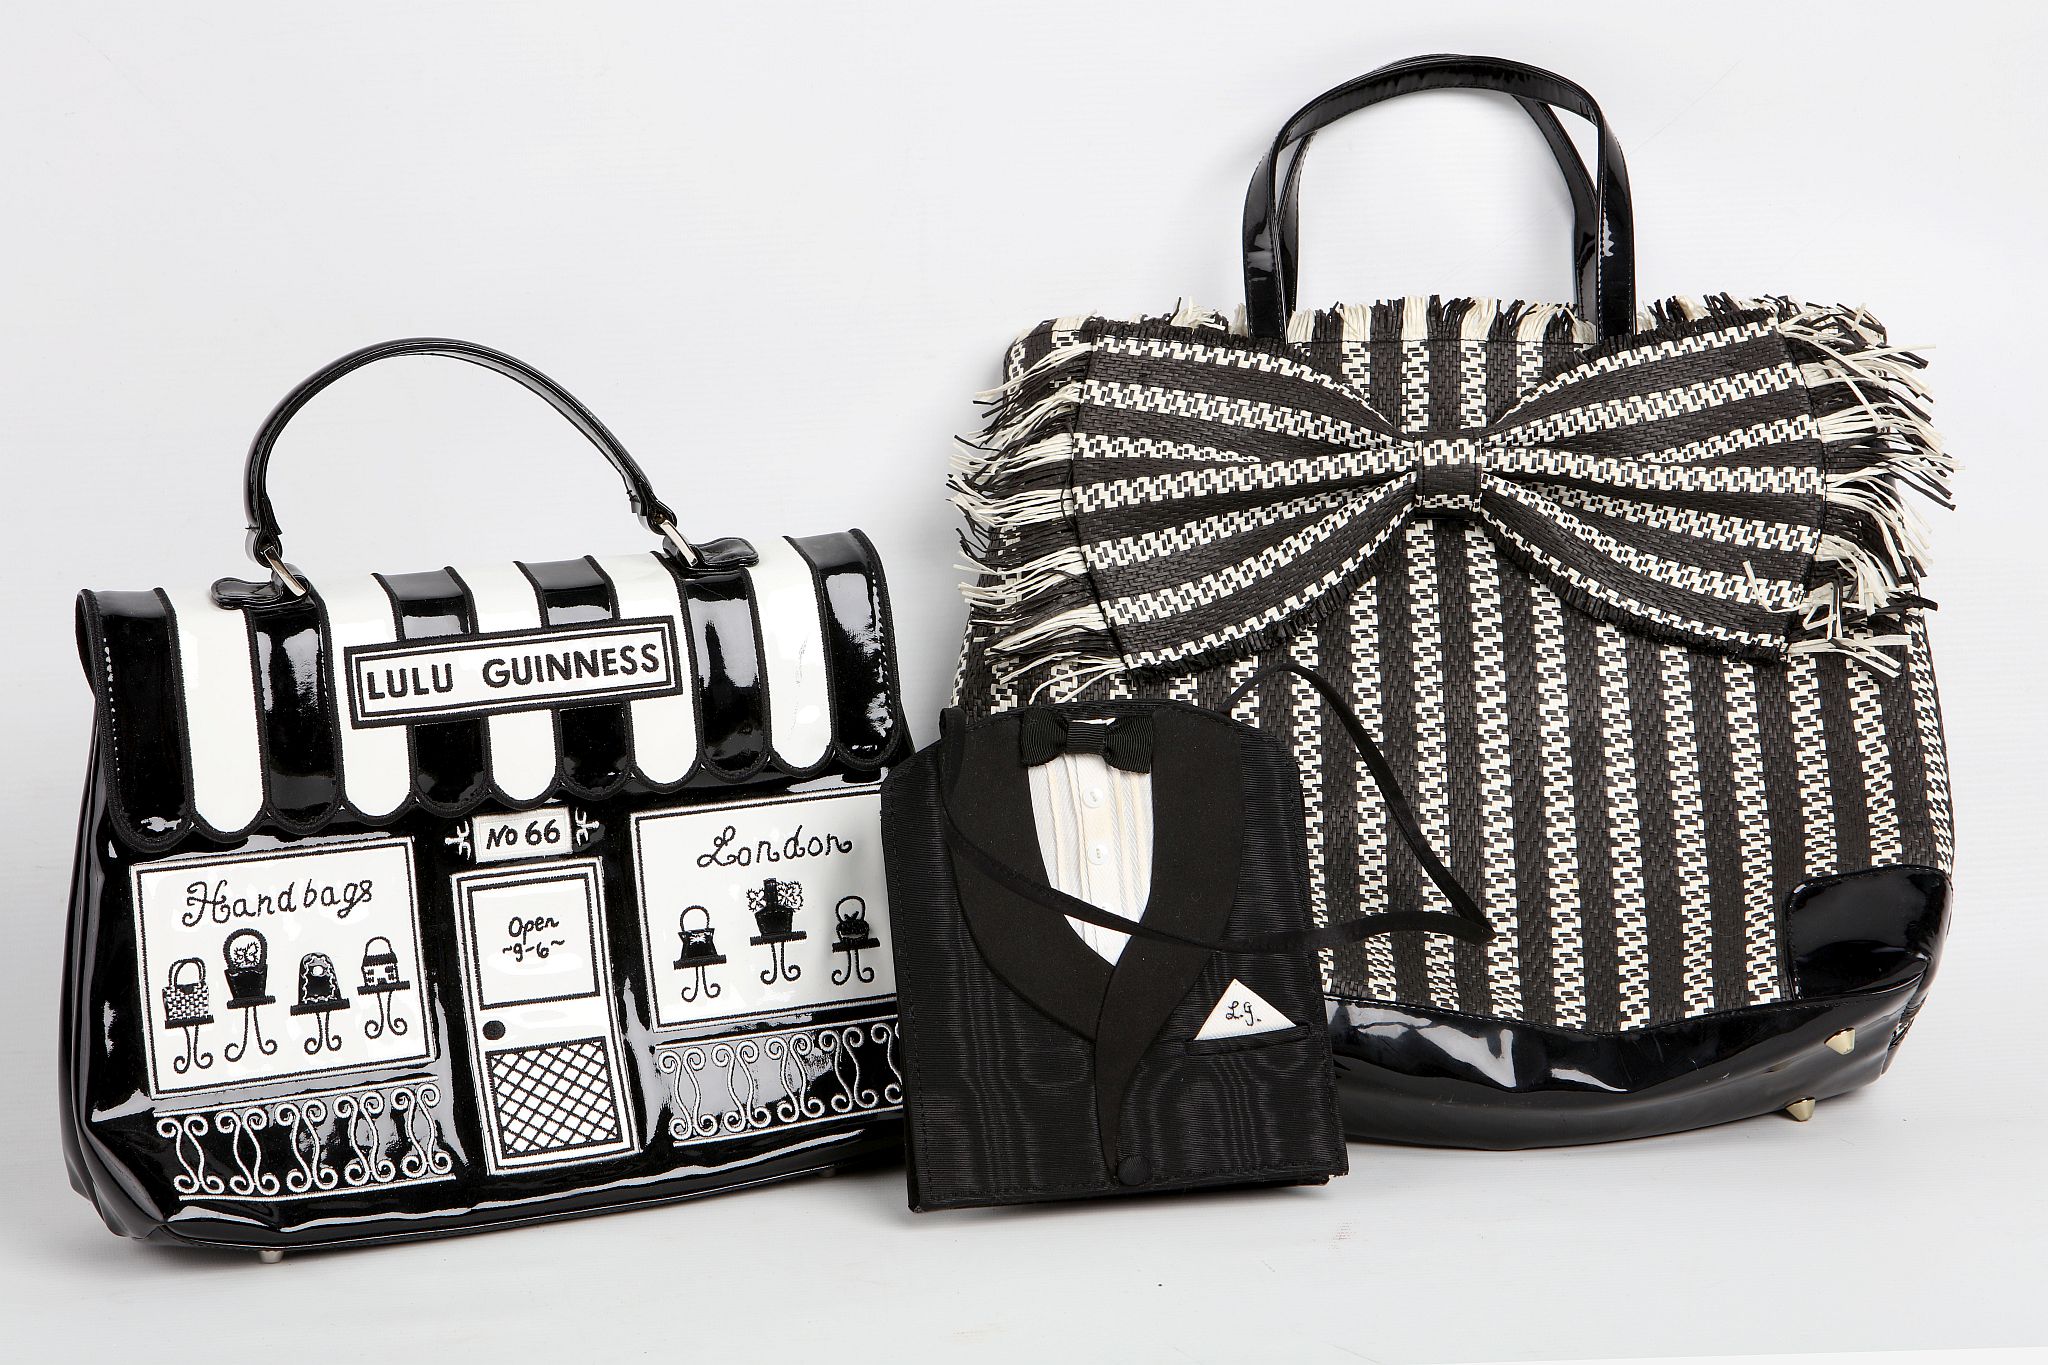 THREE LULU GUINNESS HANDBAGS, one an evening bag in the form of a dinner jacket and shirt, one black - Image 2 of 4